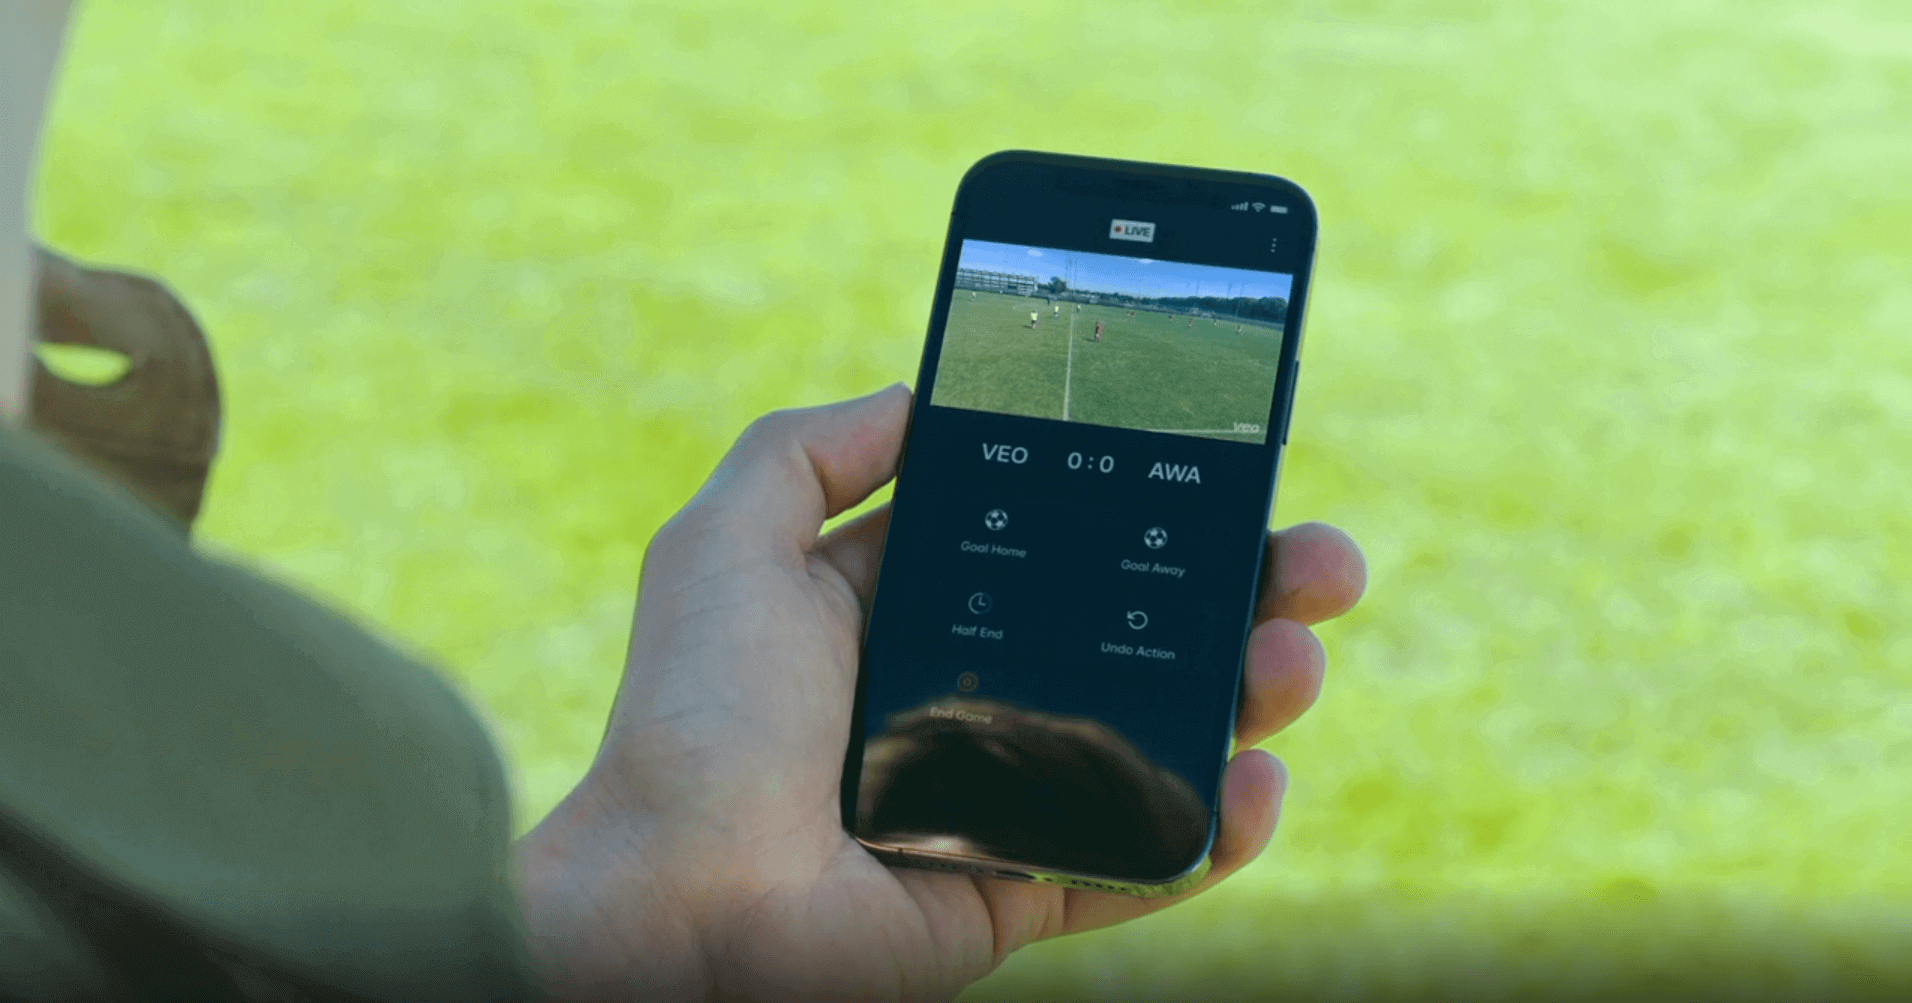 A person holding a mobile phone and interacting with the Veo Live app on the football field. The app allows users to easily set up goals, halftime, and end of game markers during live games